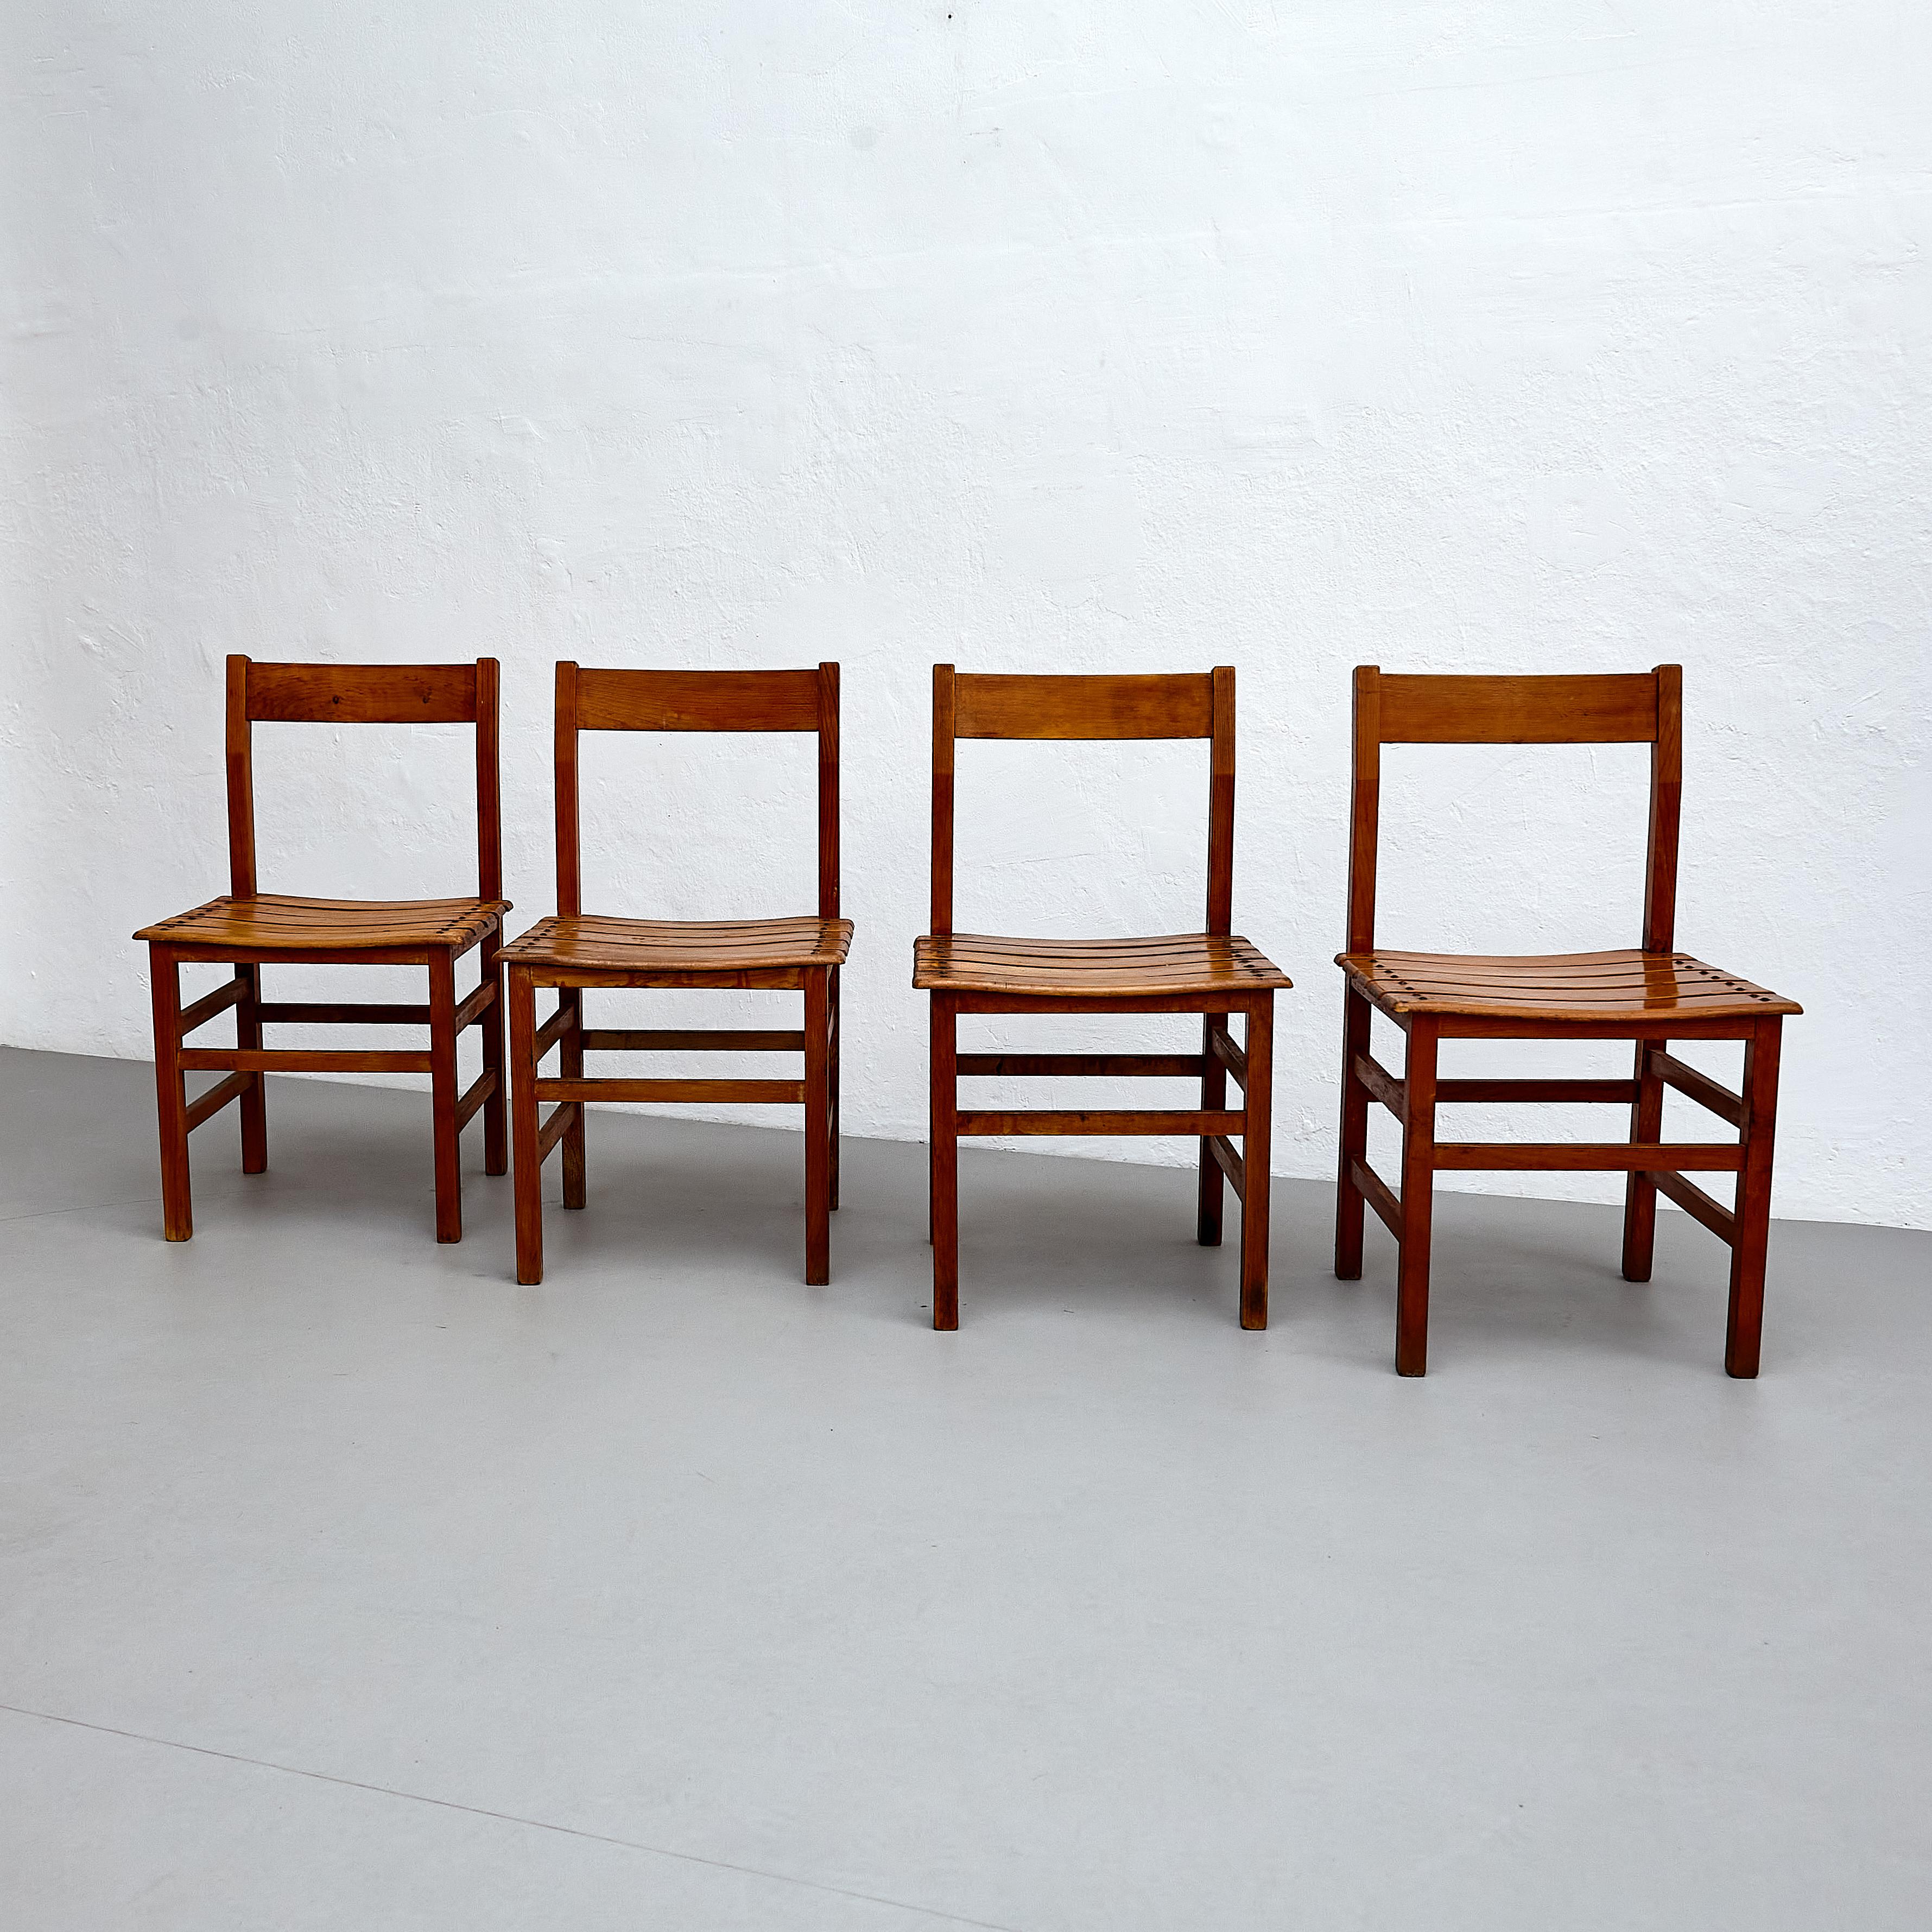 Set of four rustic wood French chairs.

Embrace the rustic charm of this set of four mid-century modern rationalist wood chairs, manufactured in France circa 1960. These chairs showcase a timeless design, making them a perfect addition to any home